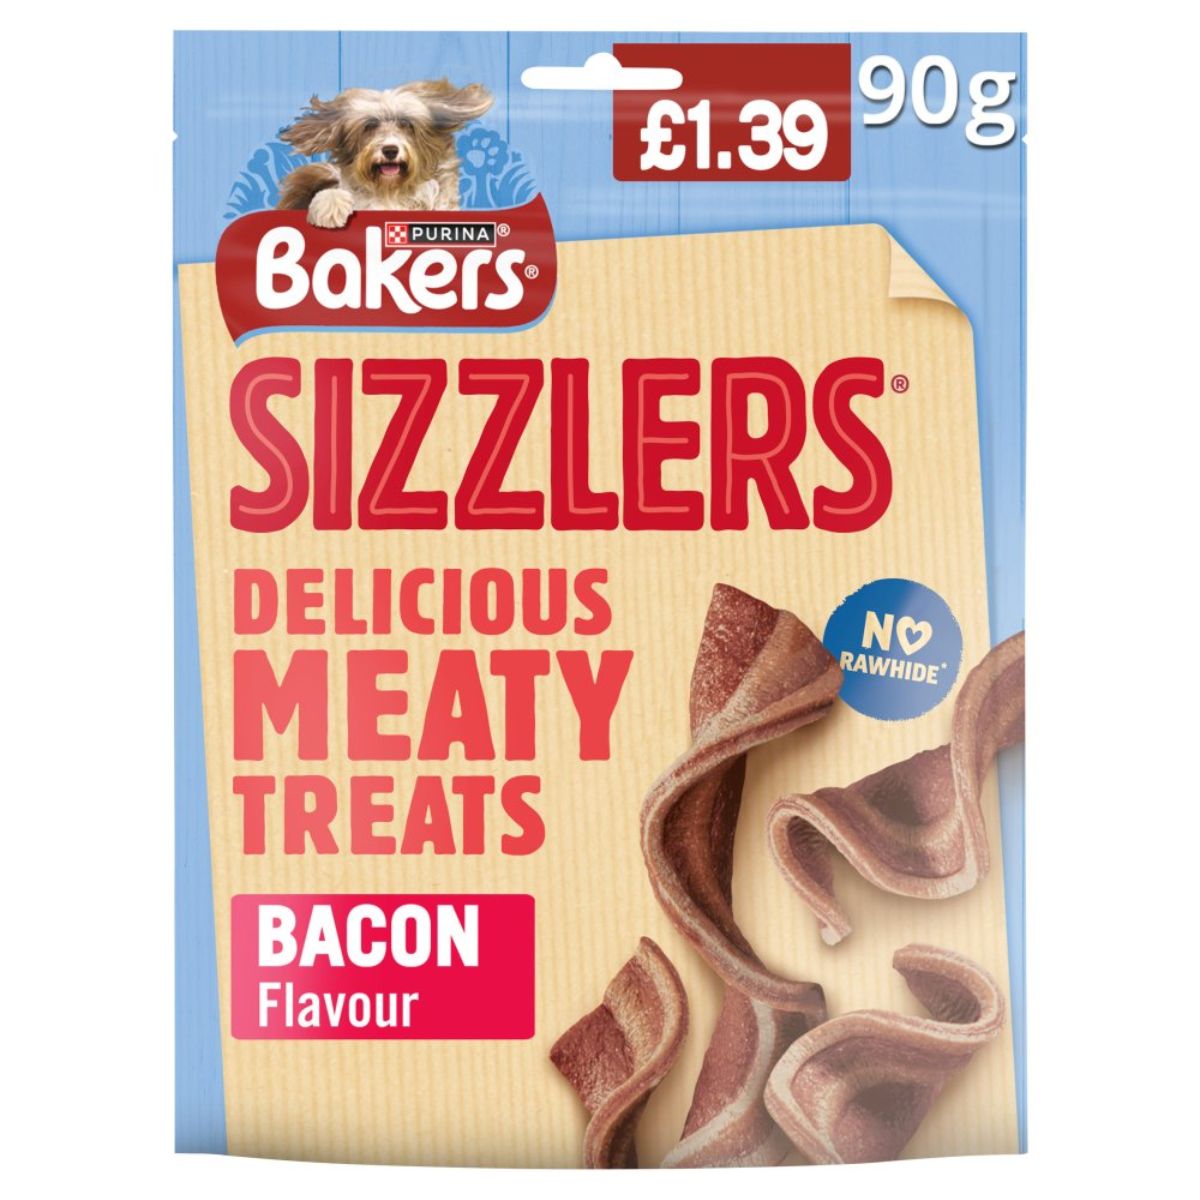 Bakers Sizzlers Delicious Meaty Treats Bacon - 90g is a delicious meaty treat with bacon flavor.